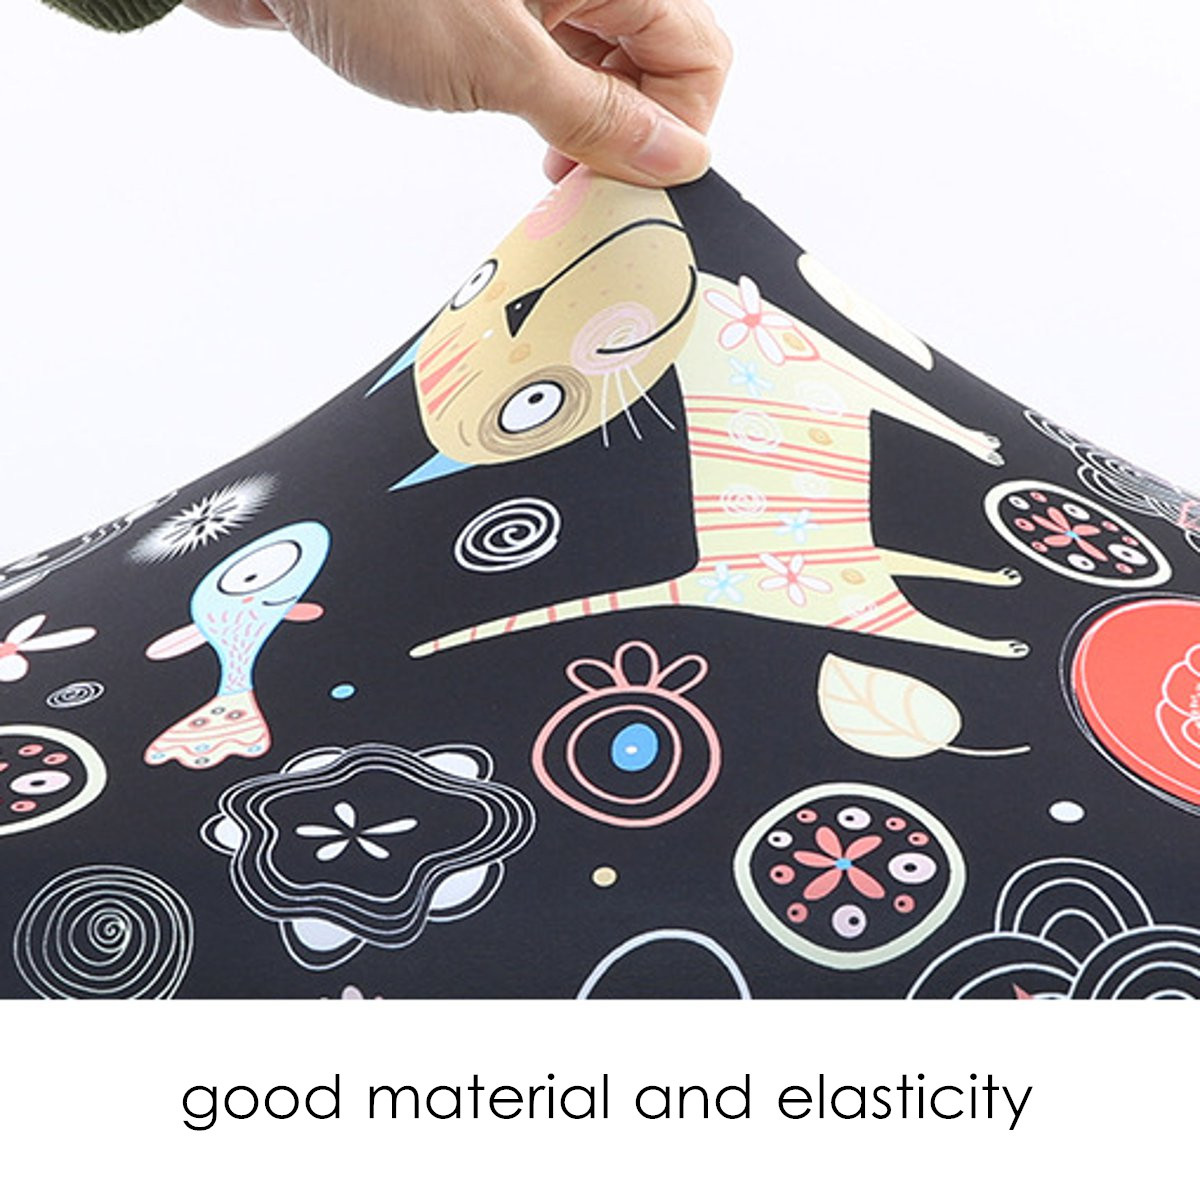 Multicolors-Elastic-Luggage-Cover-Travel-Suitcase-Protector-Dustproof-Protection-Trolley-Case-1465419-2